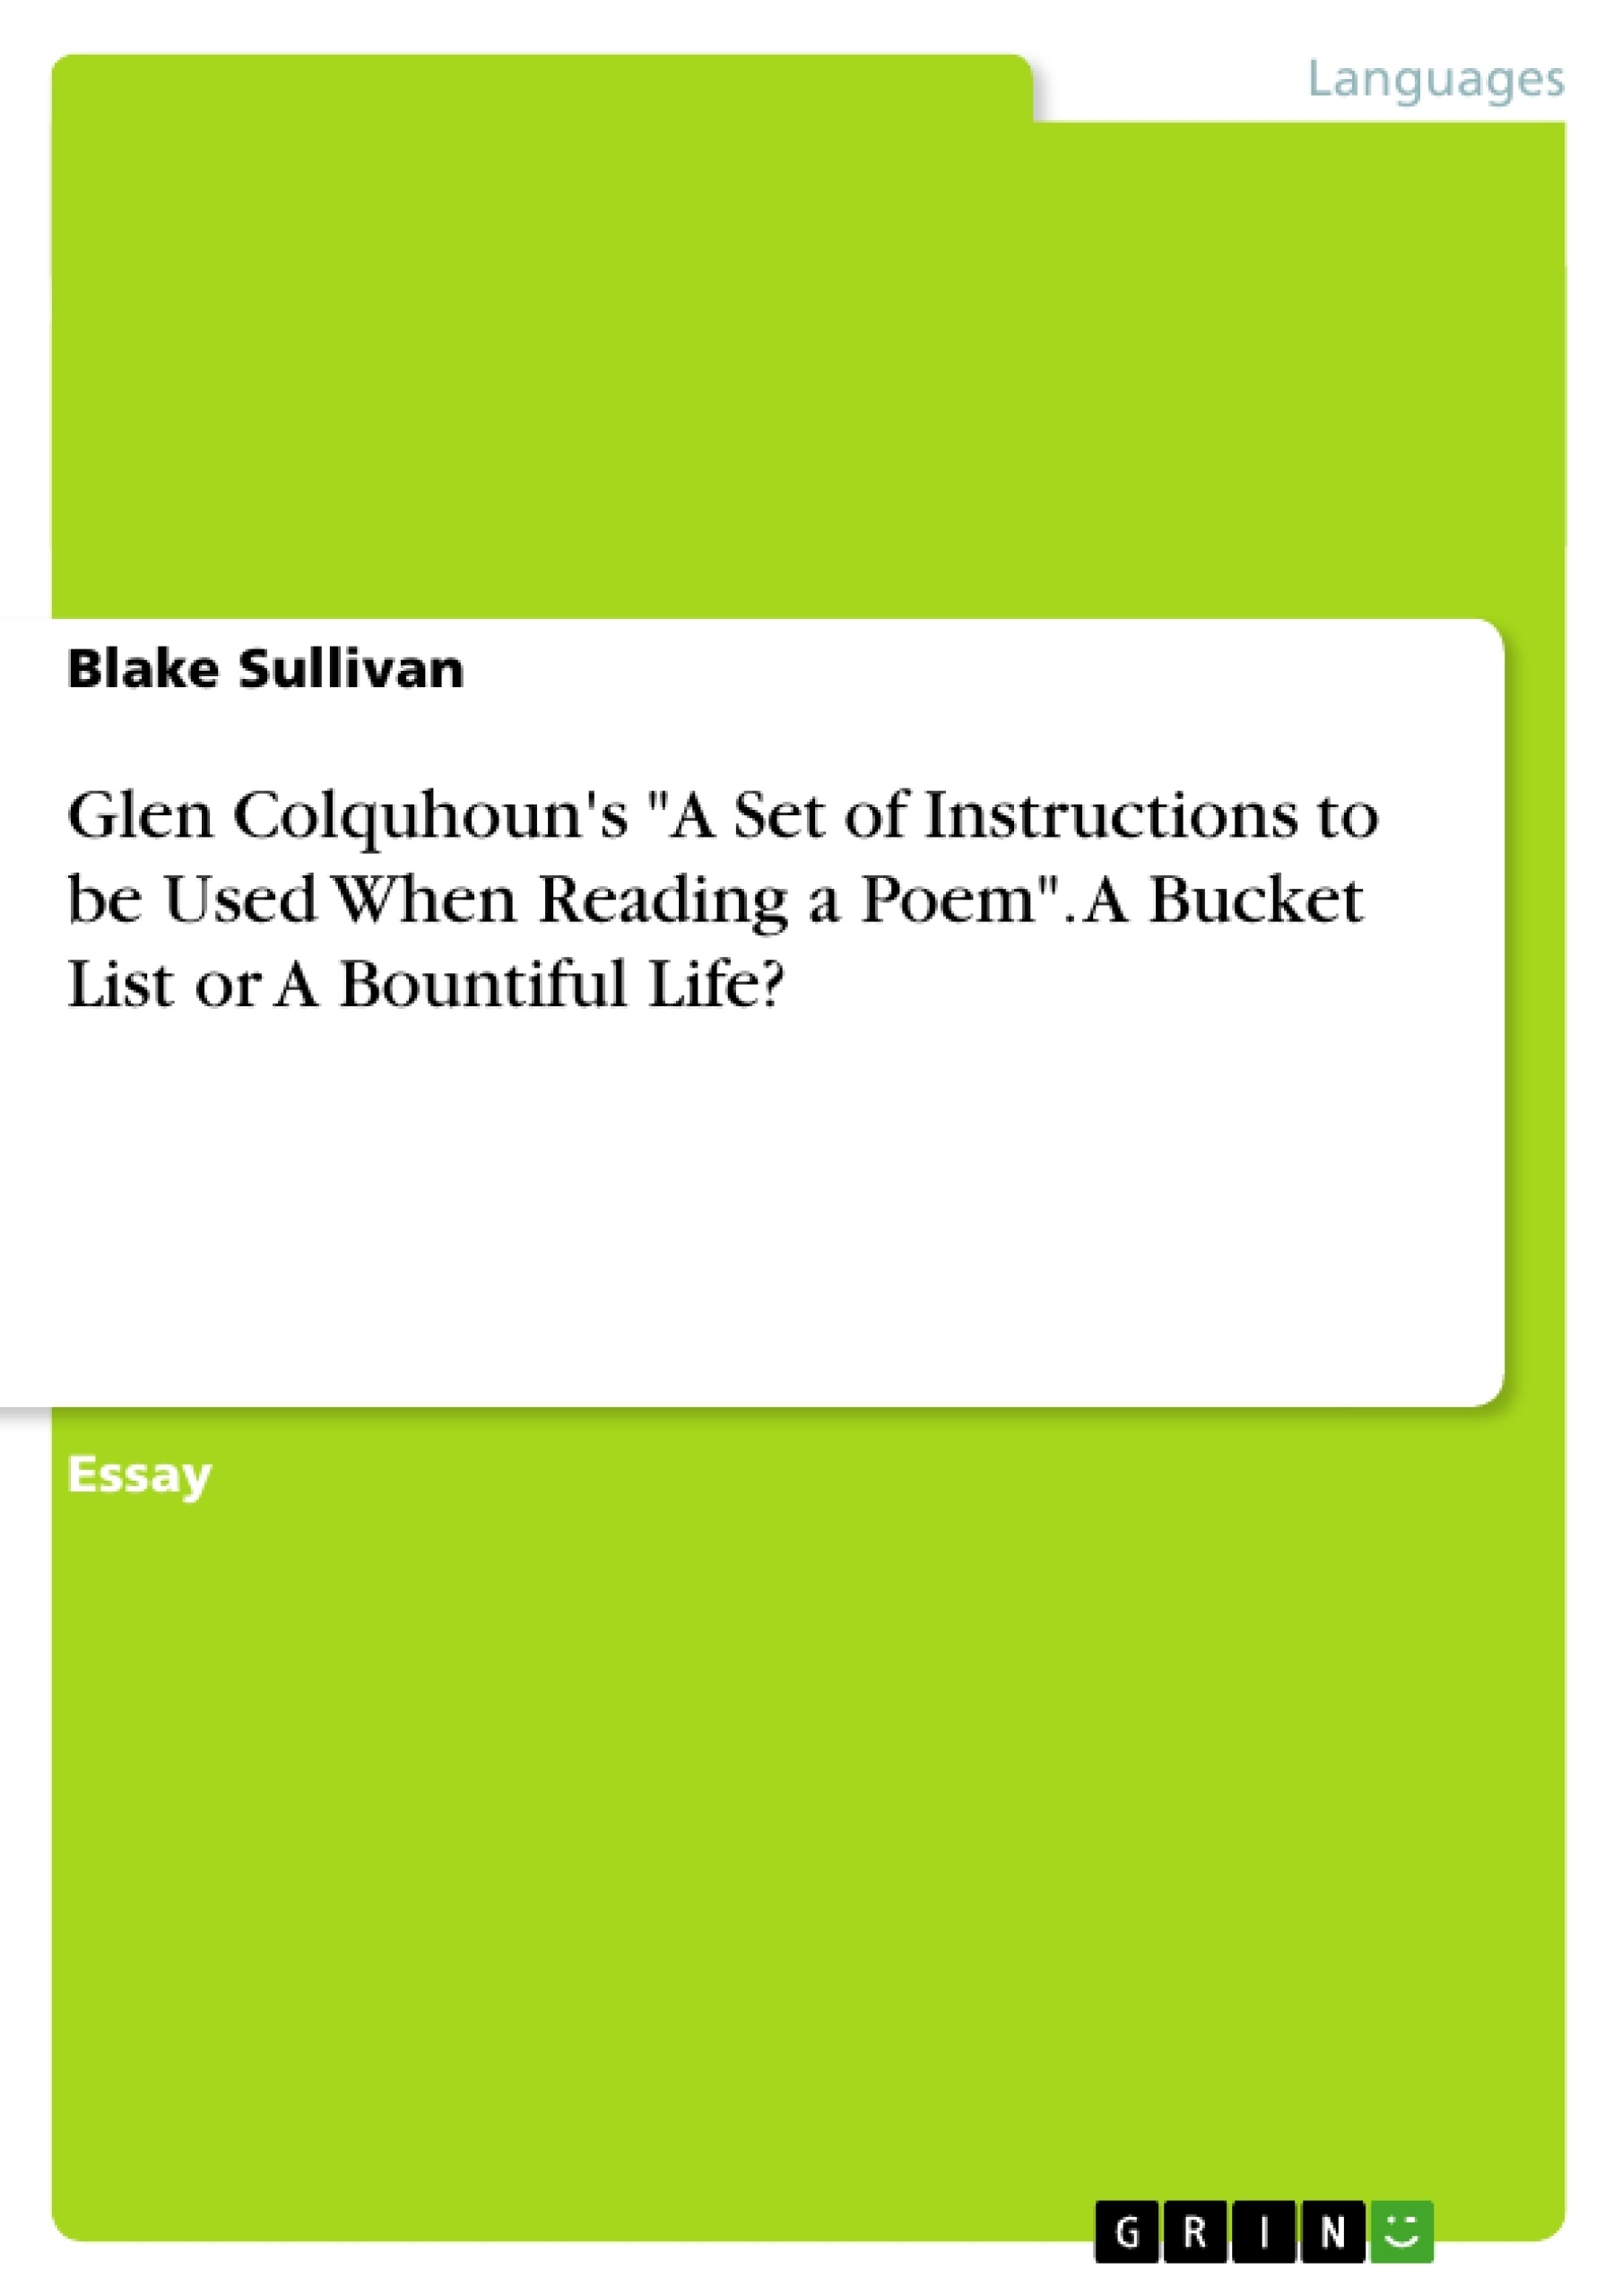 Title: Glen Colquhoun's "A Set of Instructions to be Used When Reading a Poem". A Bucket List or A Bountiful Life?